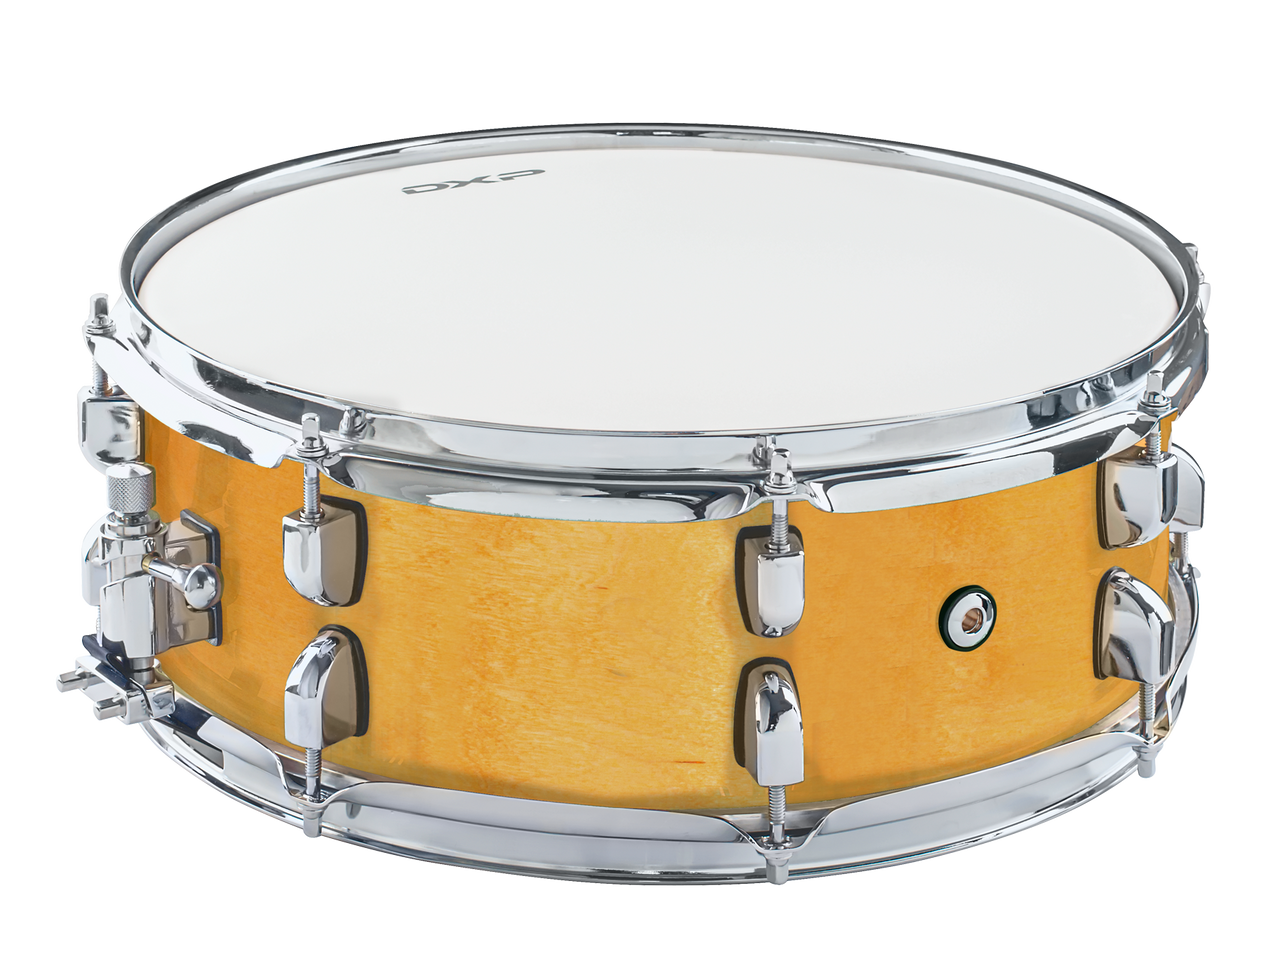 14" x 5". 6 ply. Birch shell with 16 chrome lugs with black gaskets. Super smooth strainer. Remo Coated UT Drum head. Natural finish.